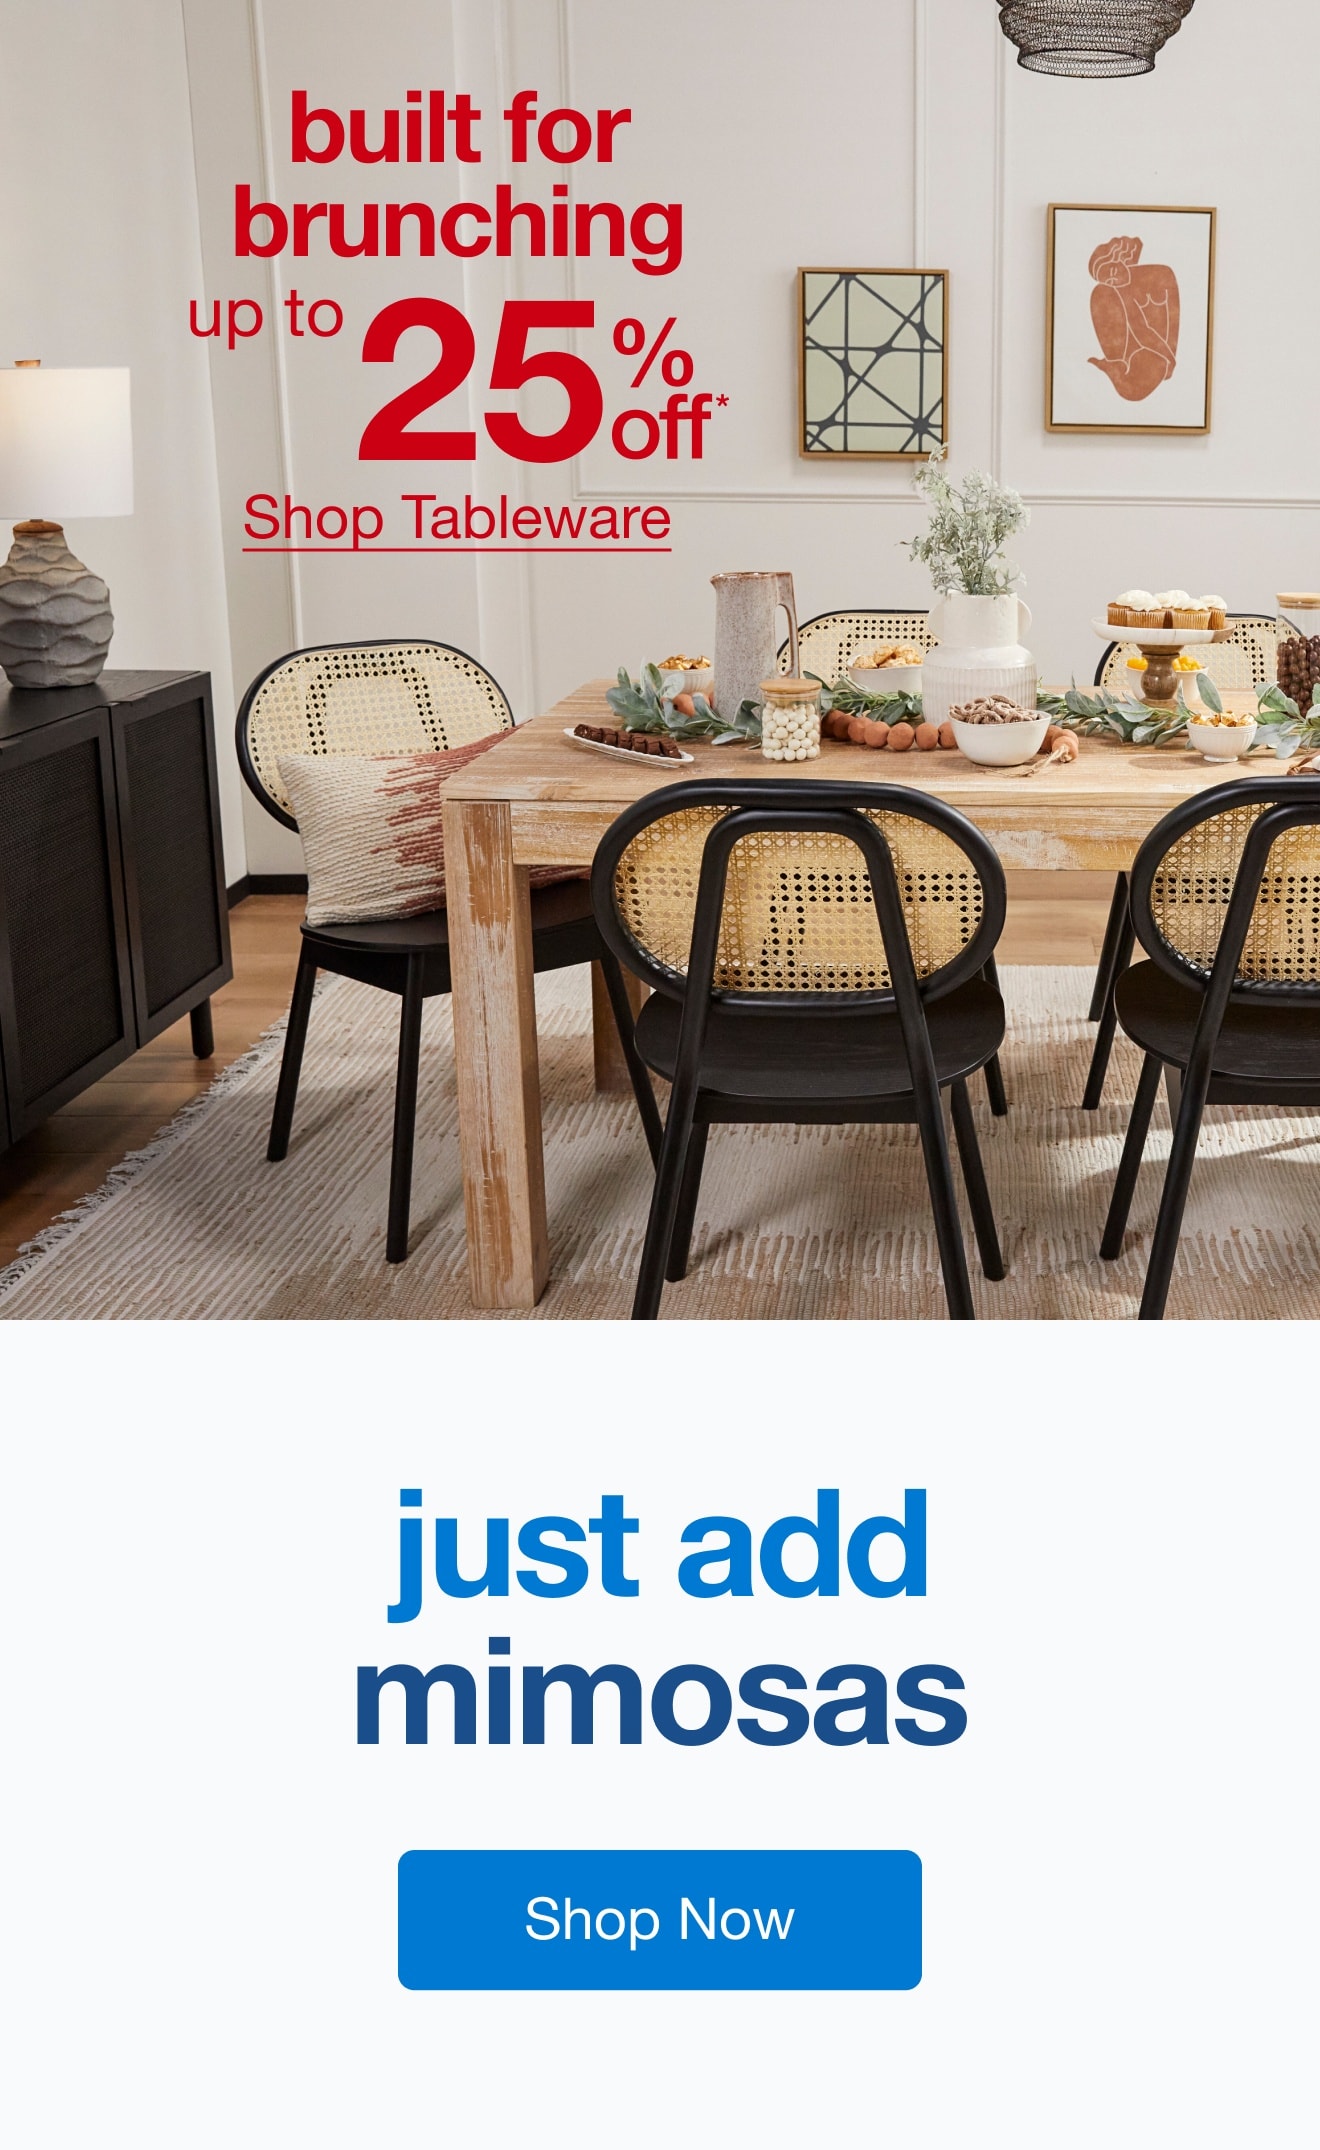 Up to 25% off* Tableware — Shop Now!